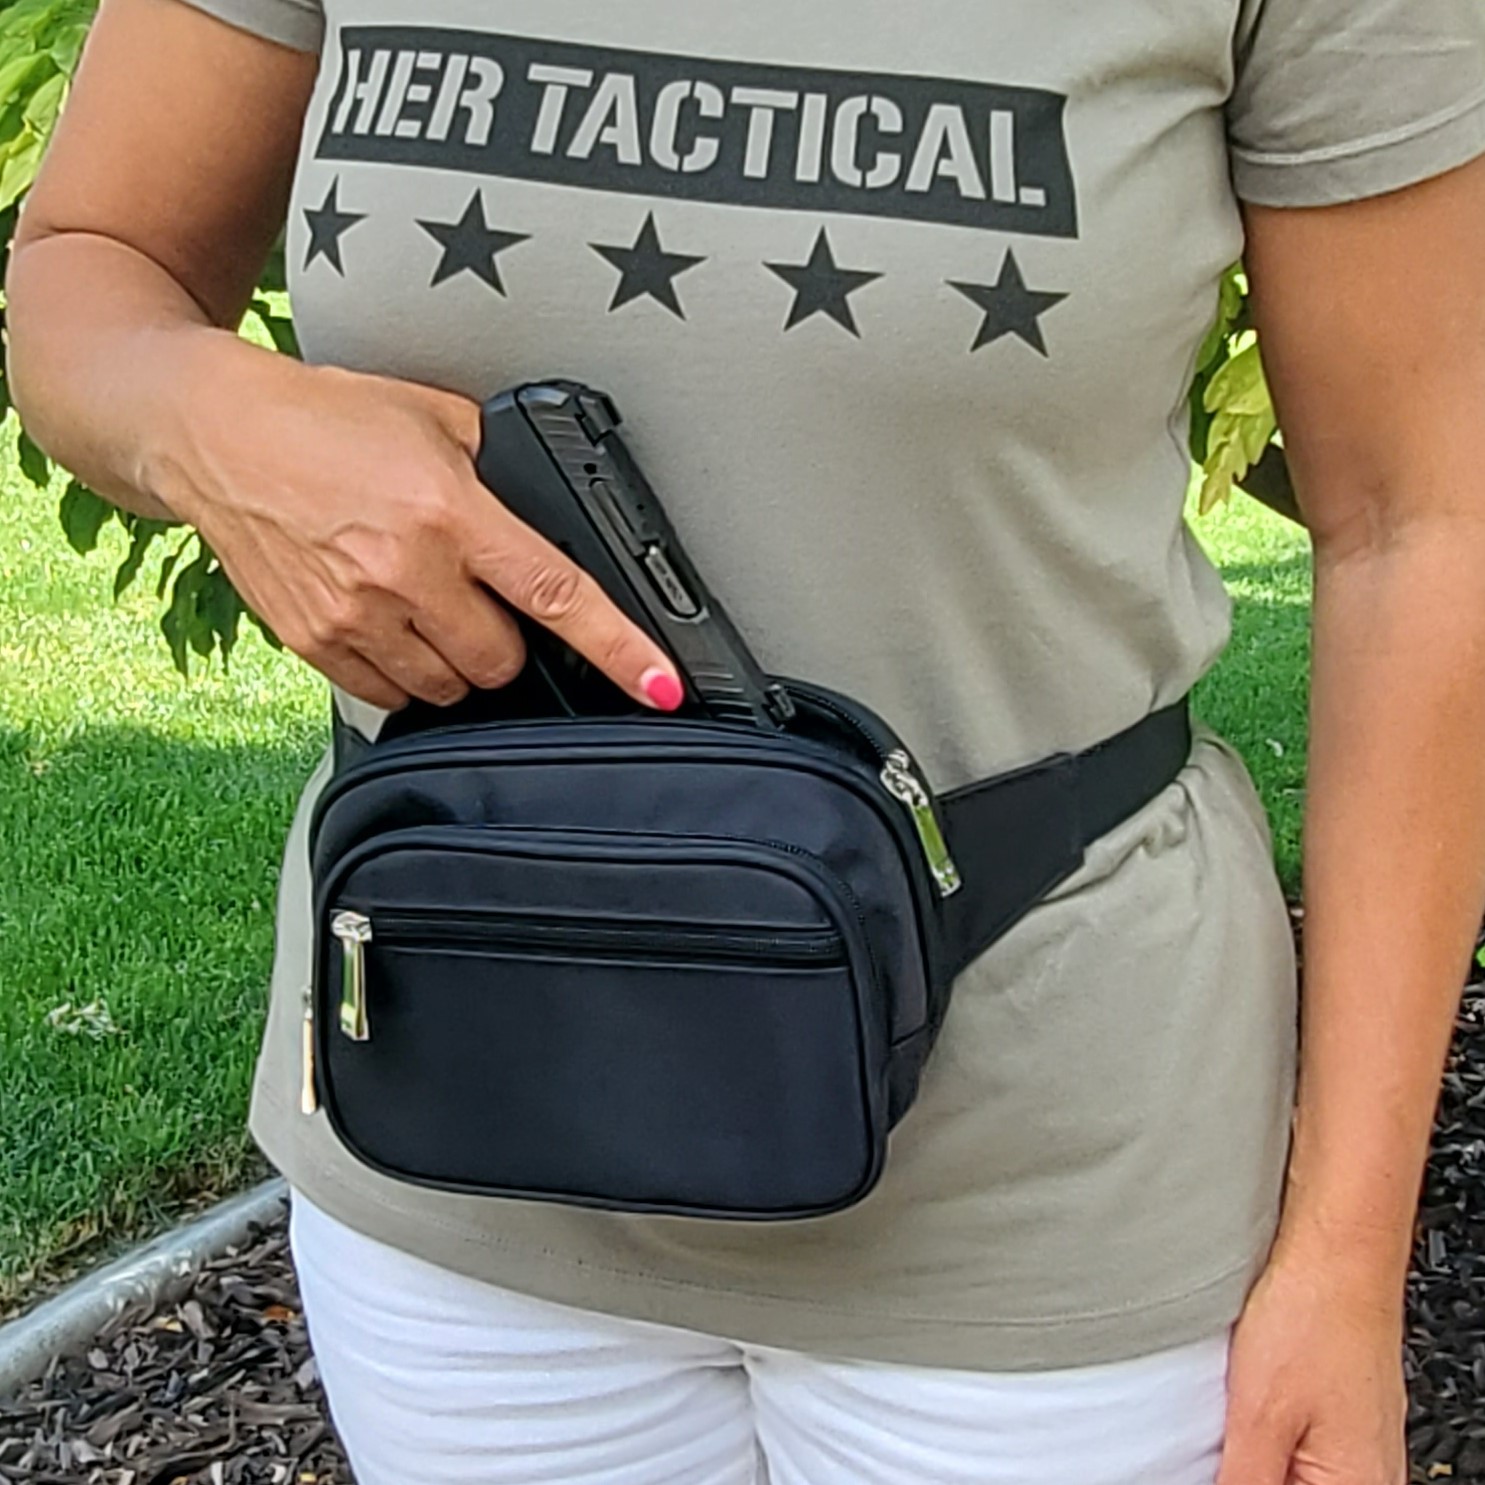 HER TACTICAL Concealed Carry Fanny Pack for Compact Gun